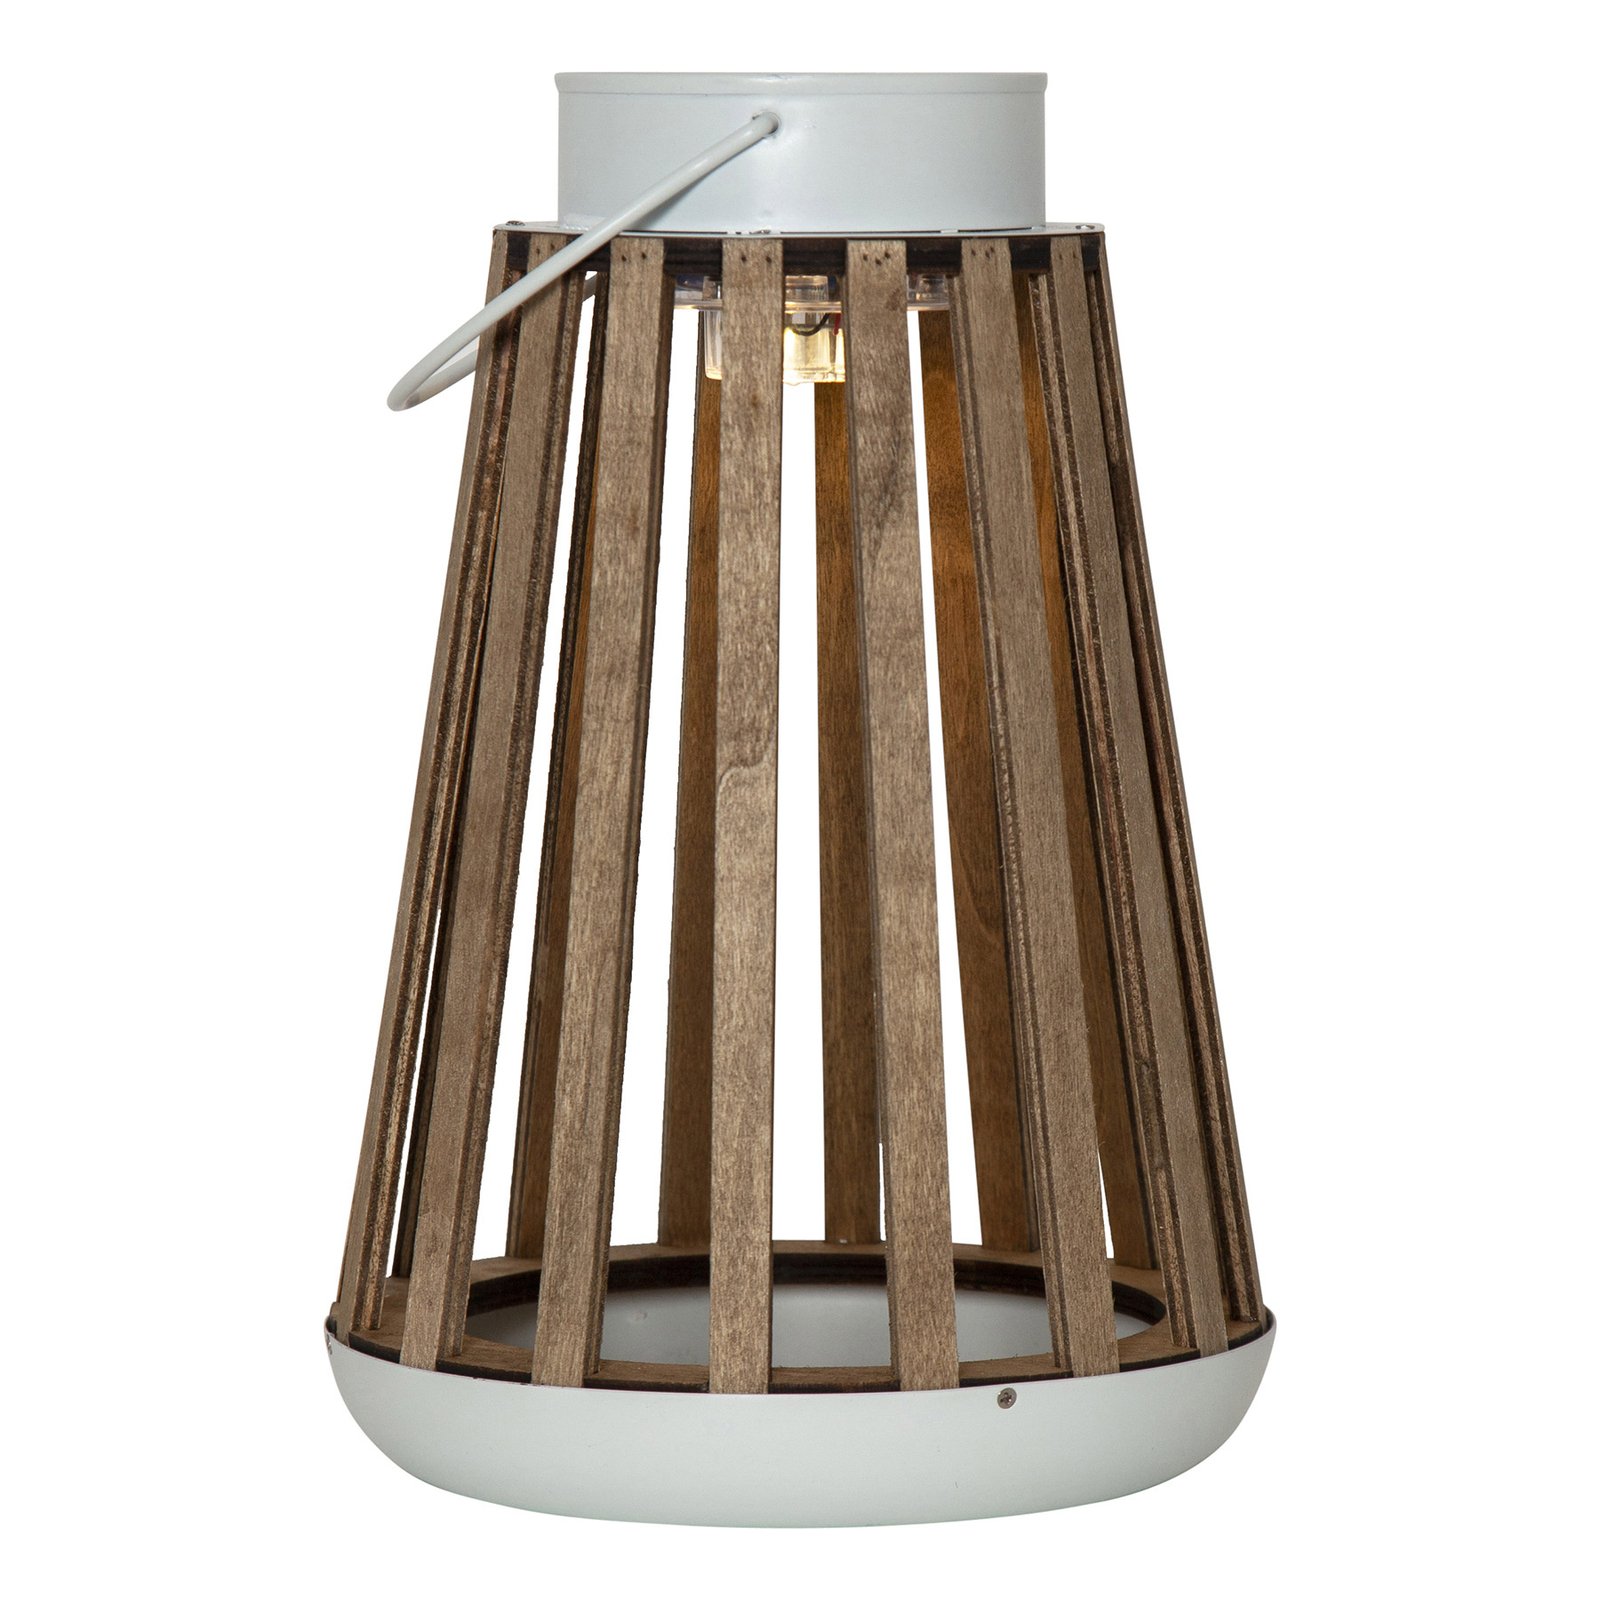 Catania LED solar table lamp made of birch wood